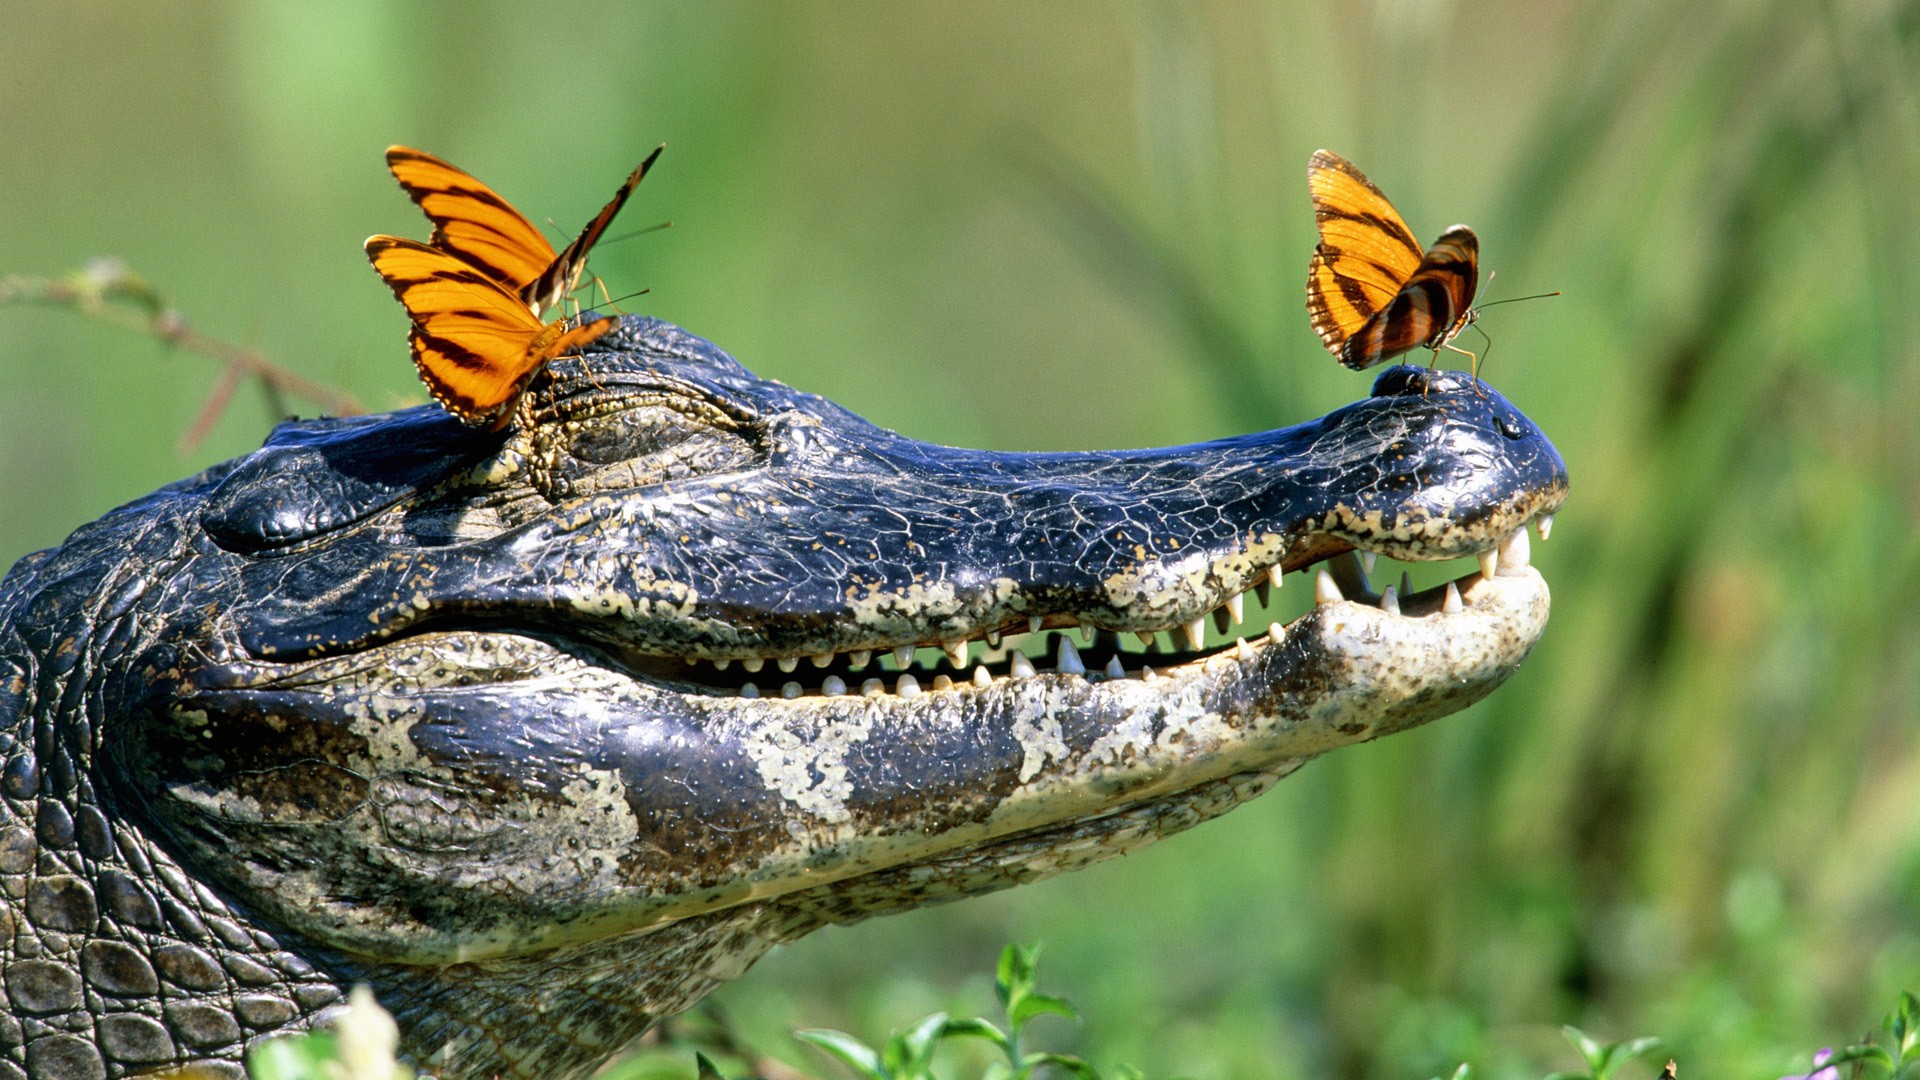 General 1920x1080 crocodiles butterfly reptiles animals